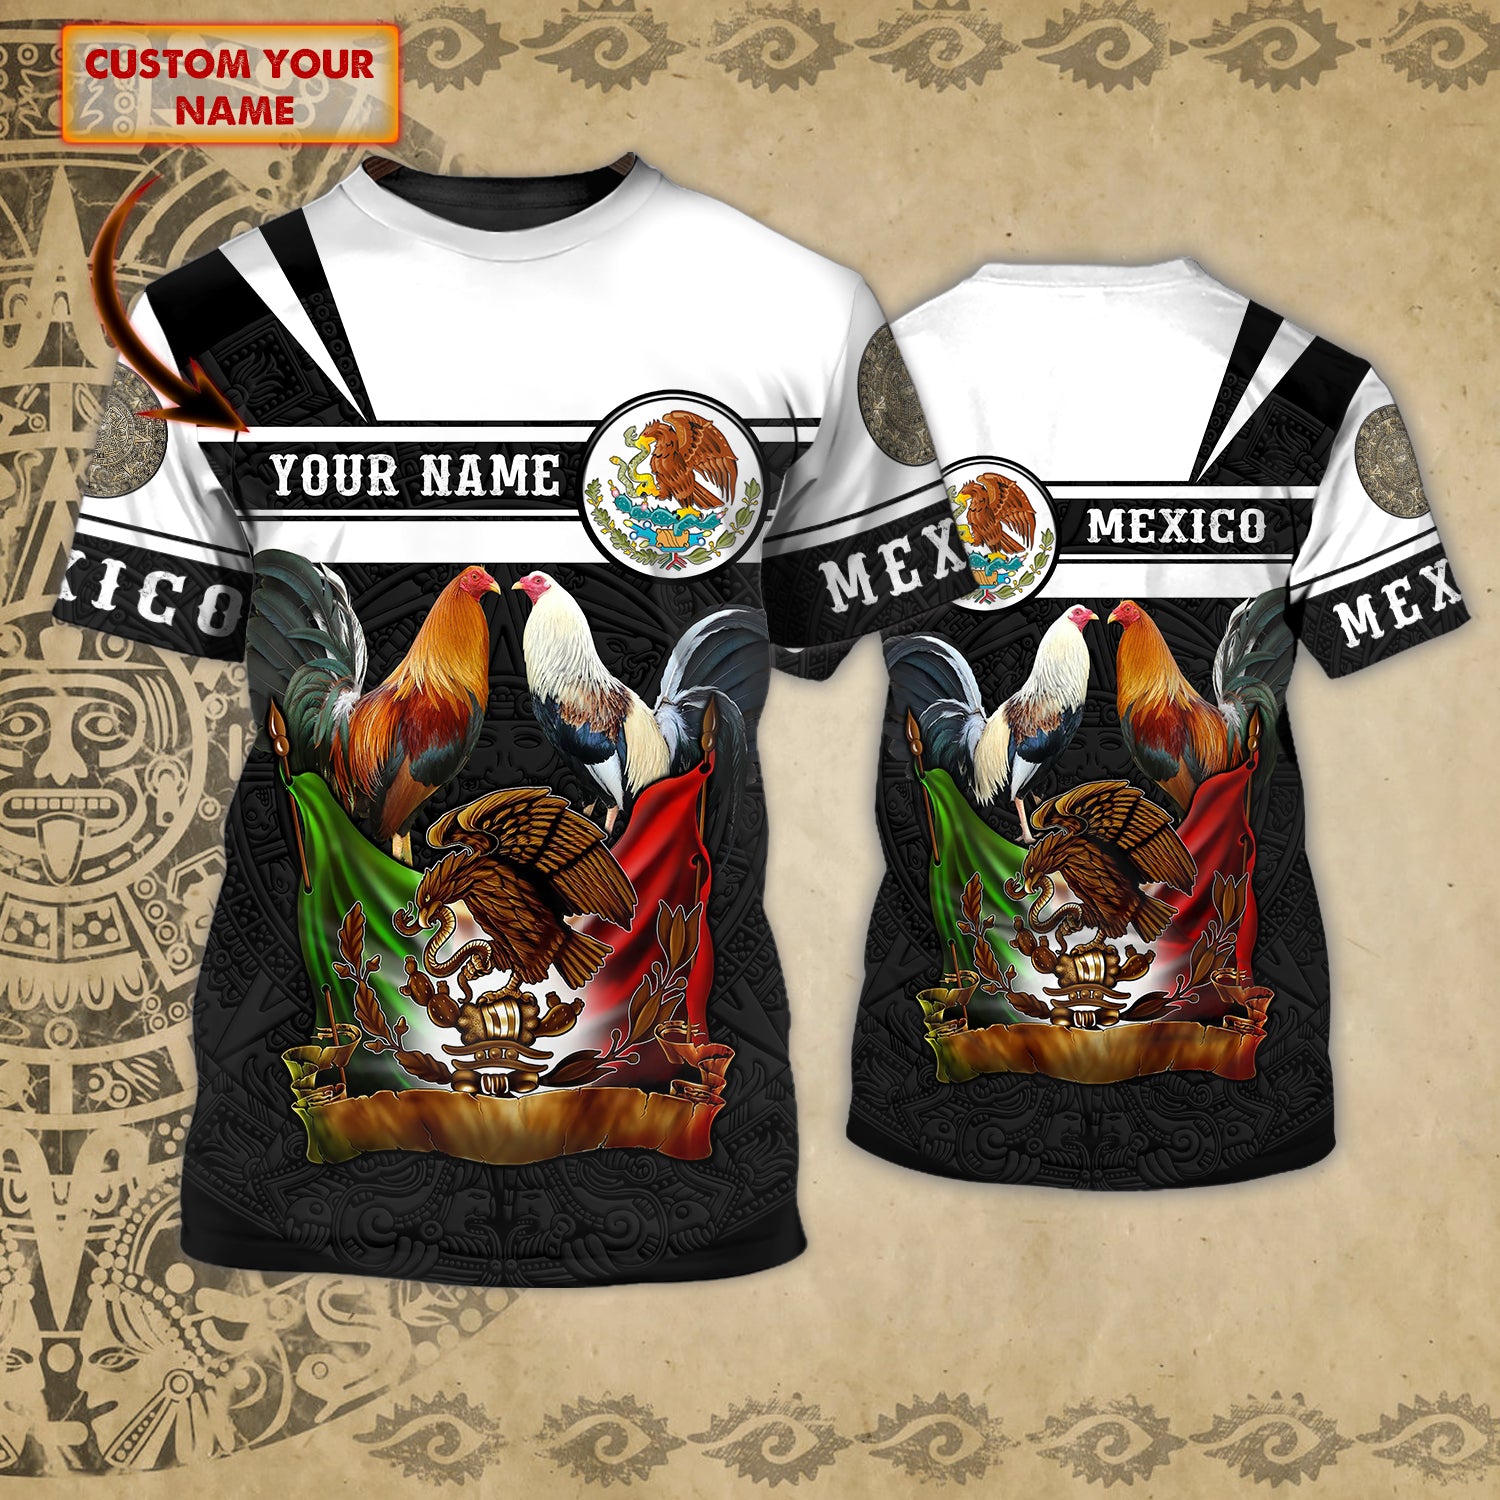 MEXICO - Personalized Name 3D T Shirt 02 - CV98